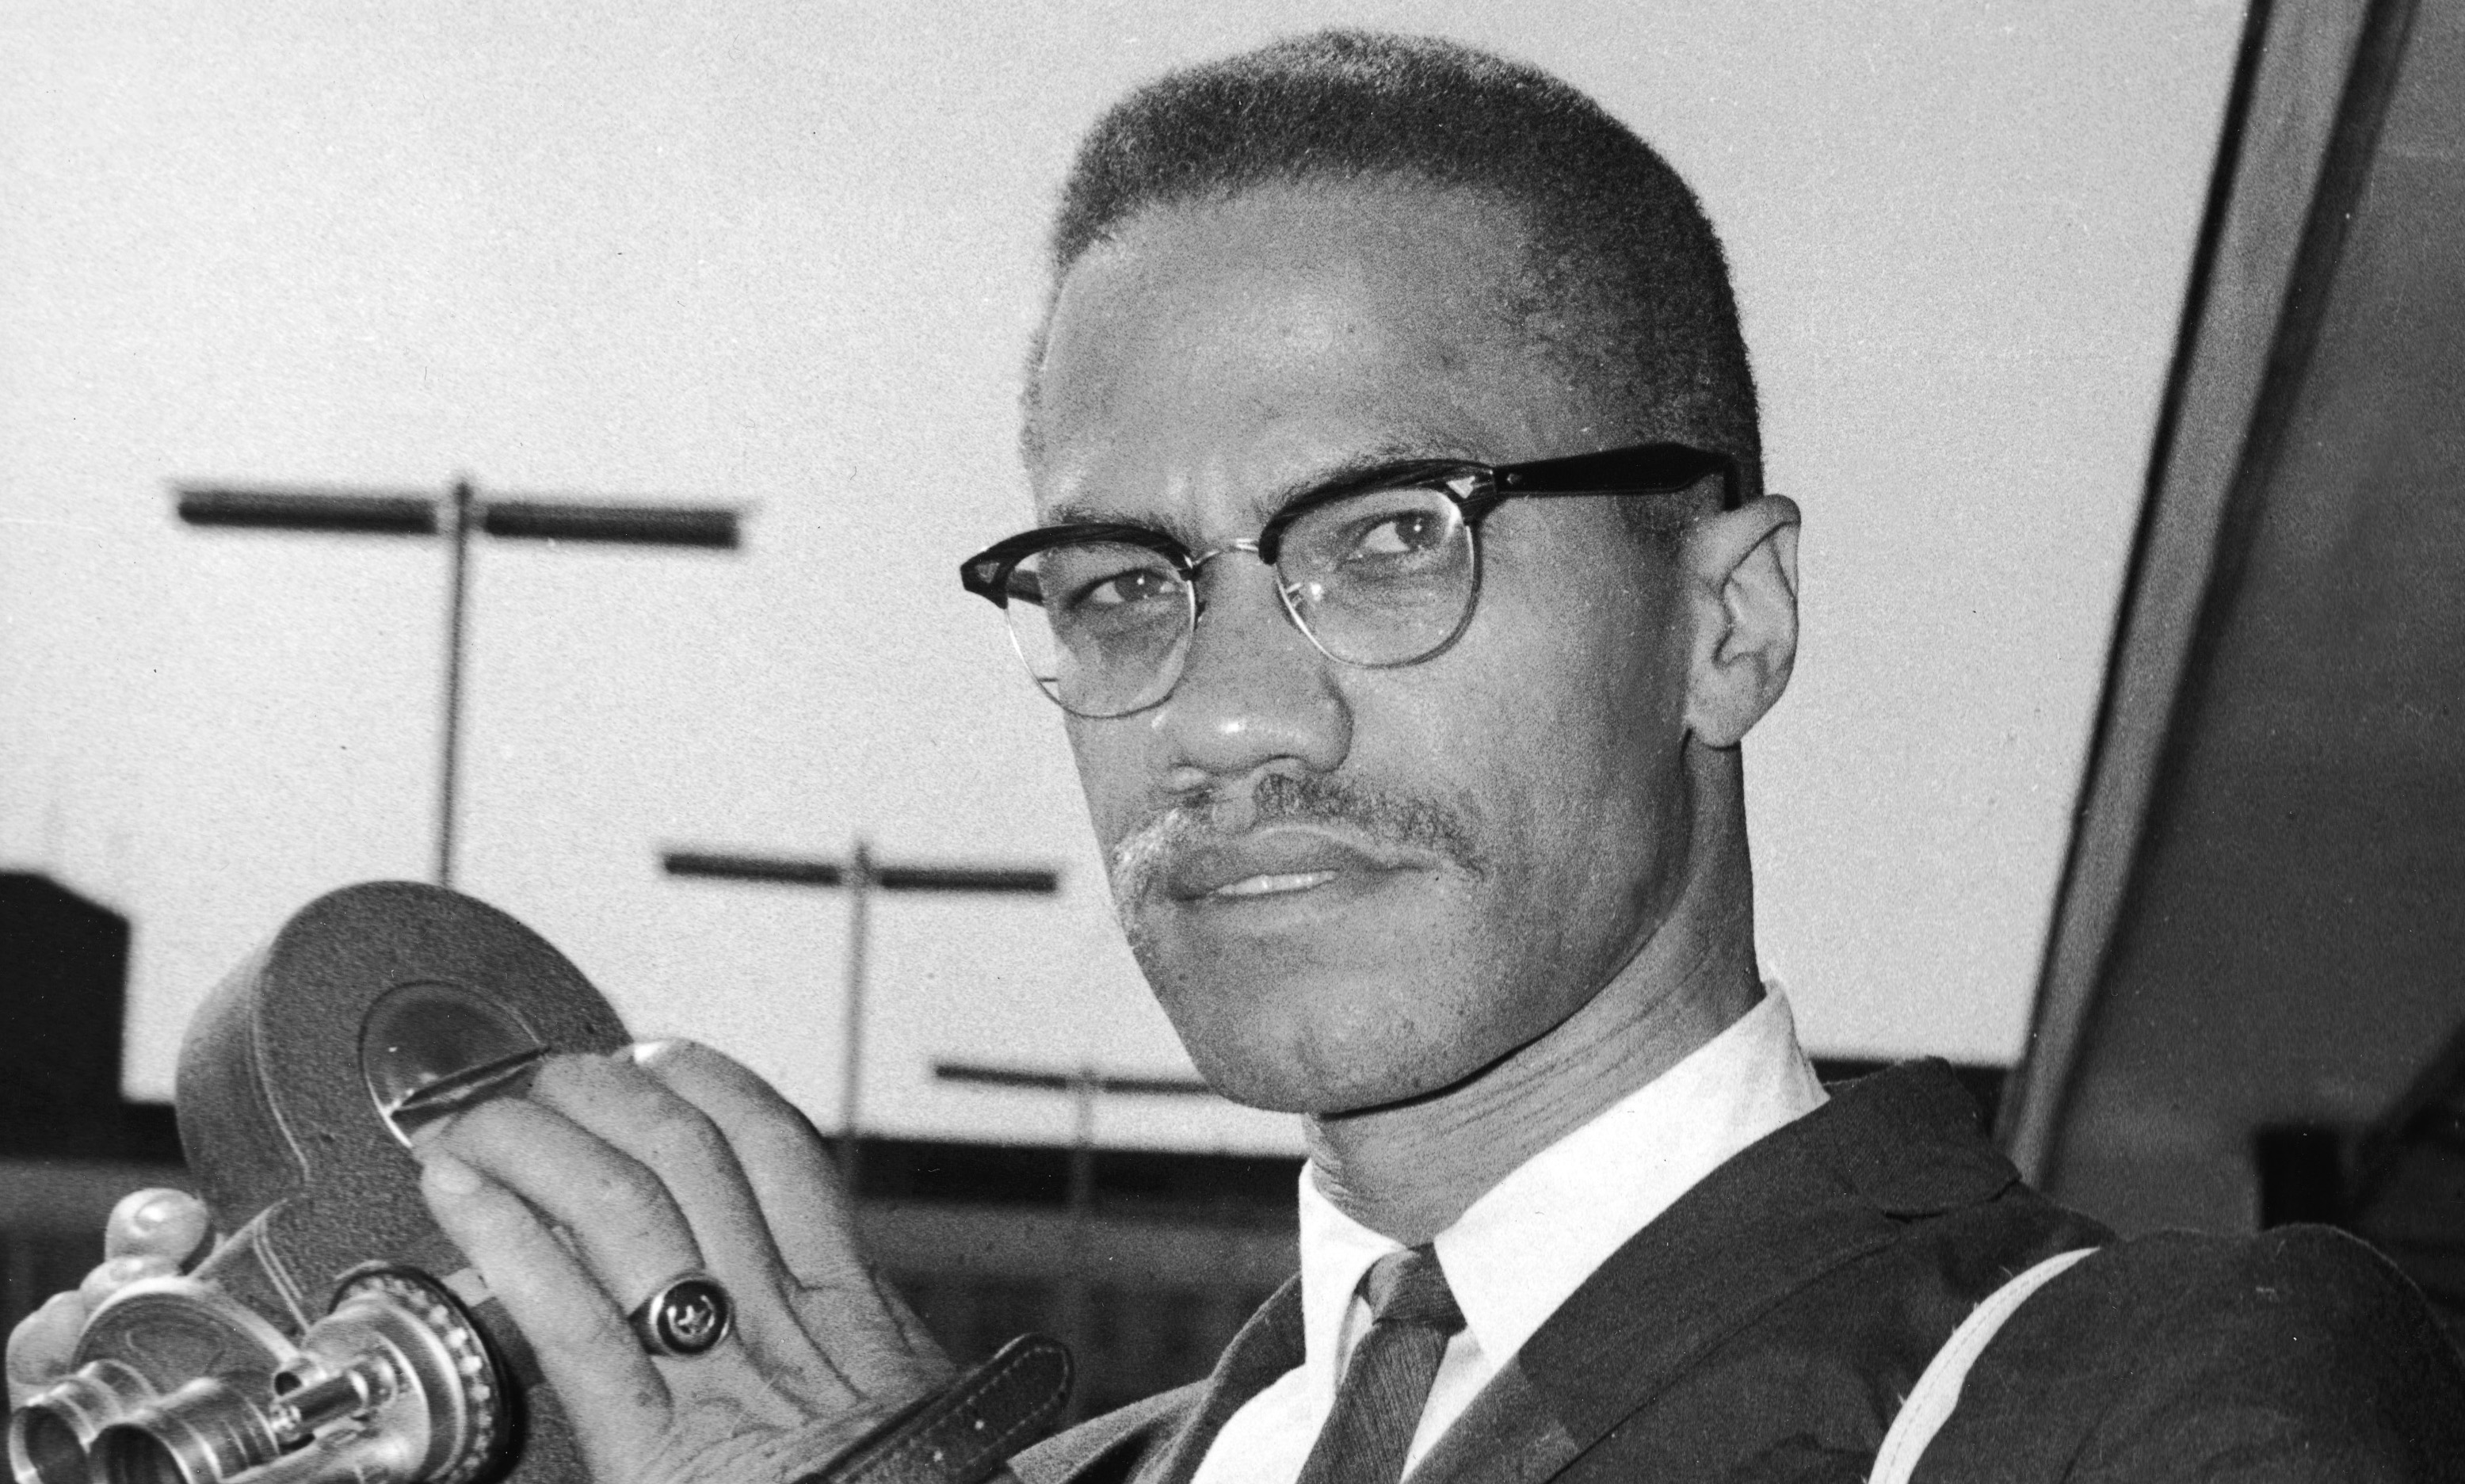 Family Of Malcolm X Want His Murder Case Reopened, Say New Evidence Implicates NYPD